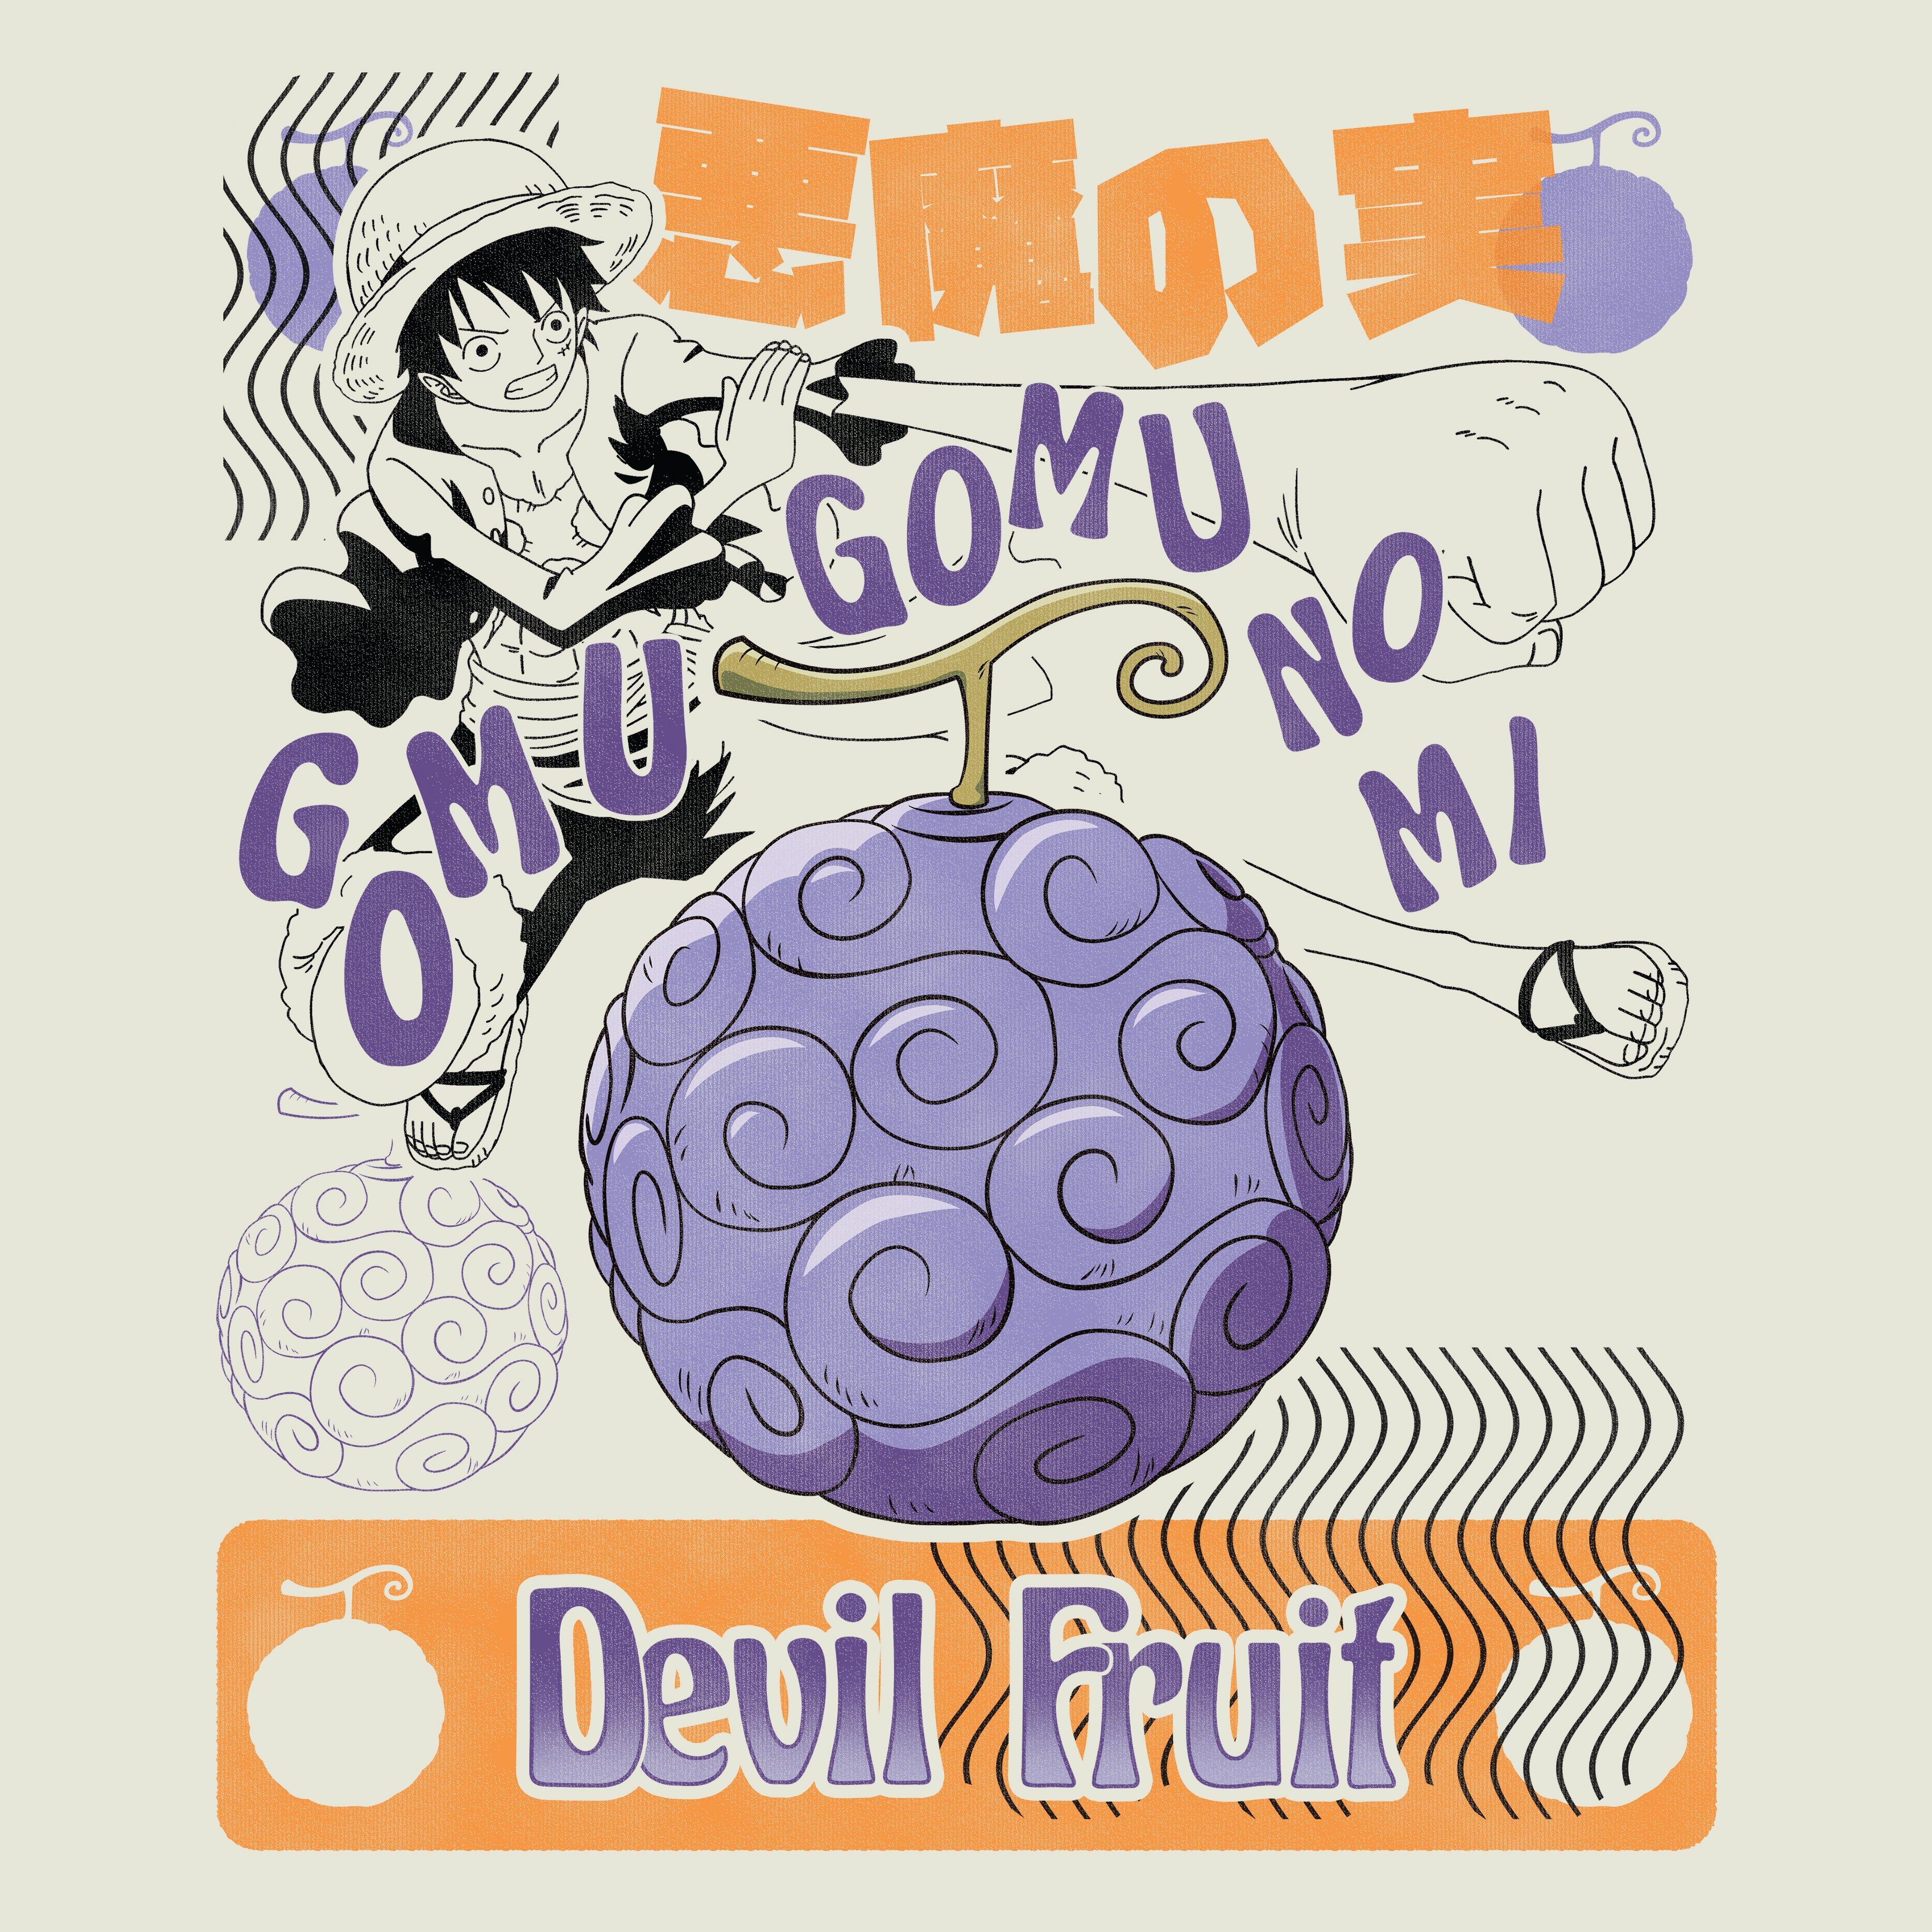 If You had the choice to select any 2 Devil fruits, Which Devil